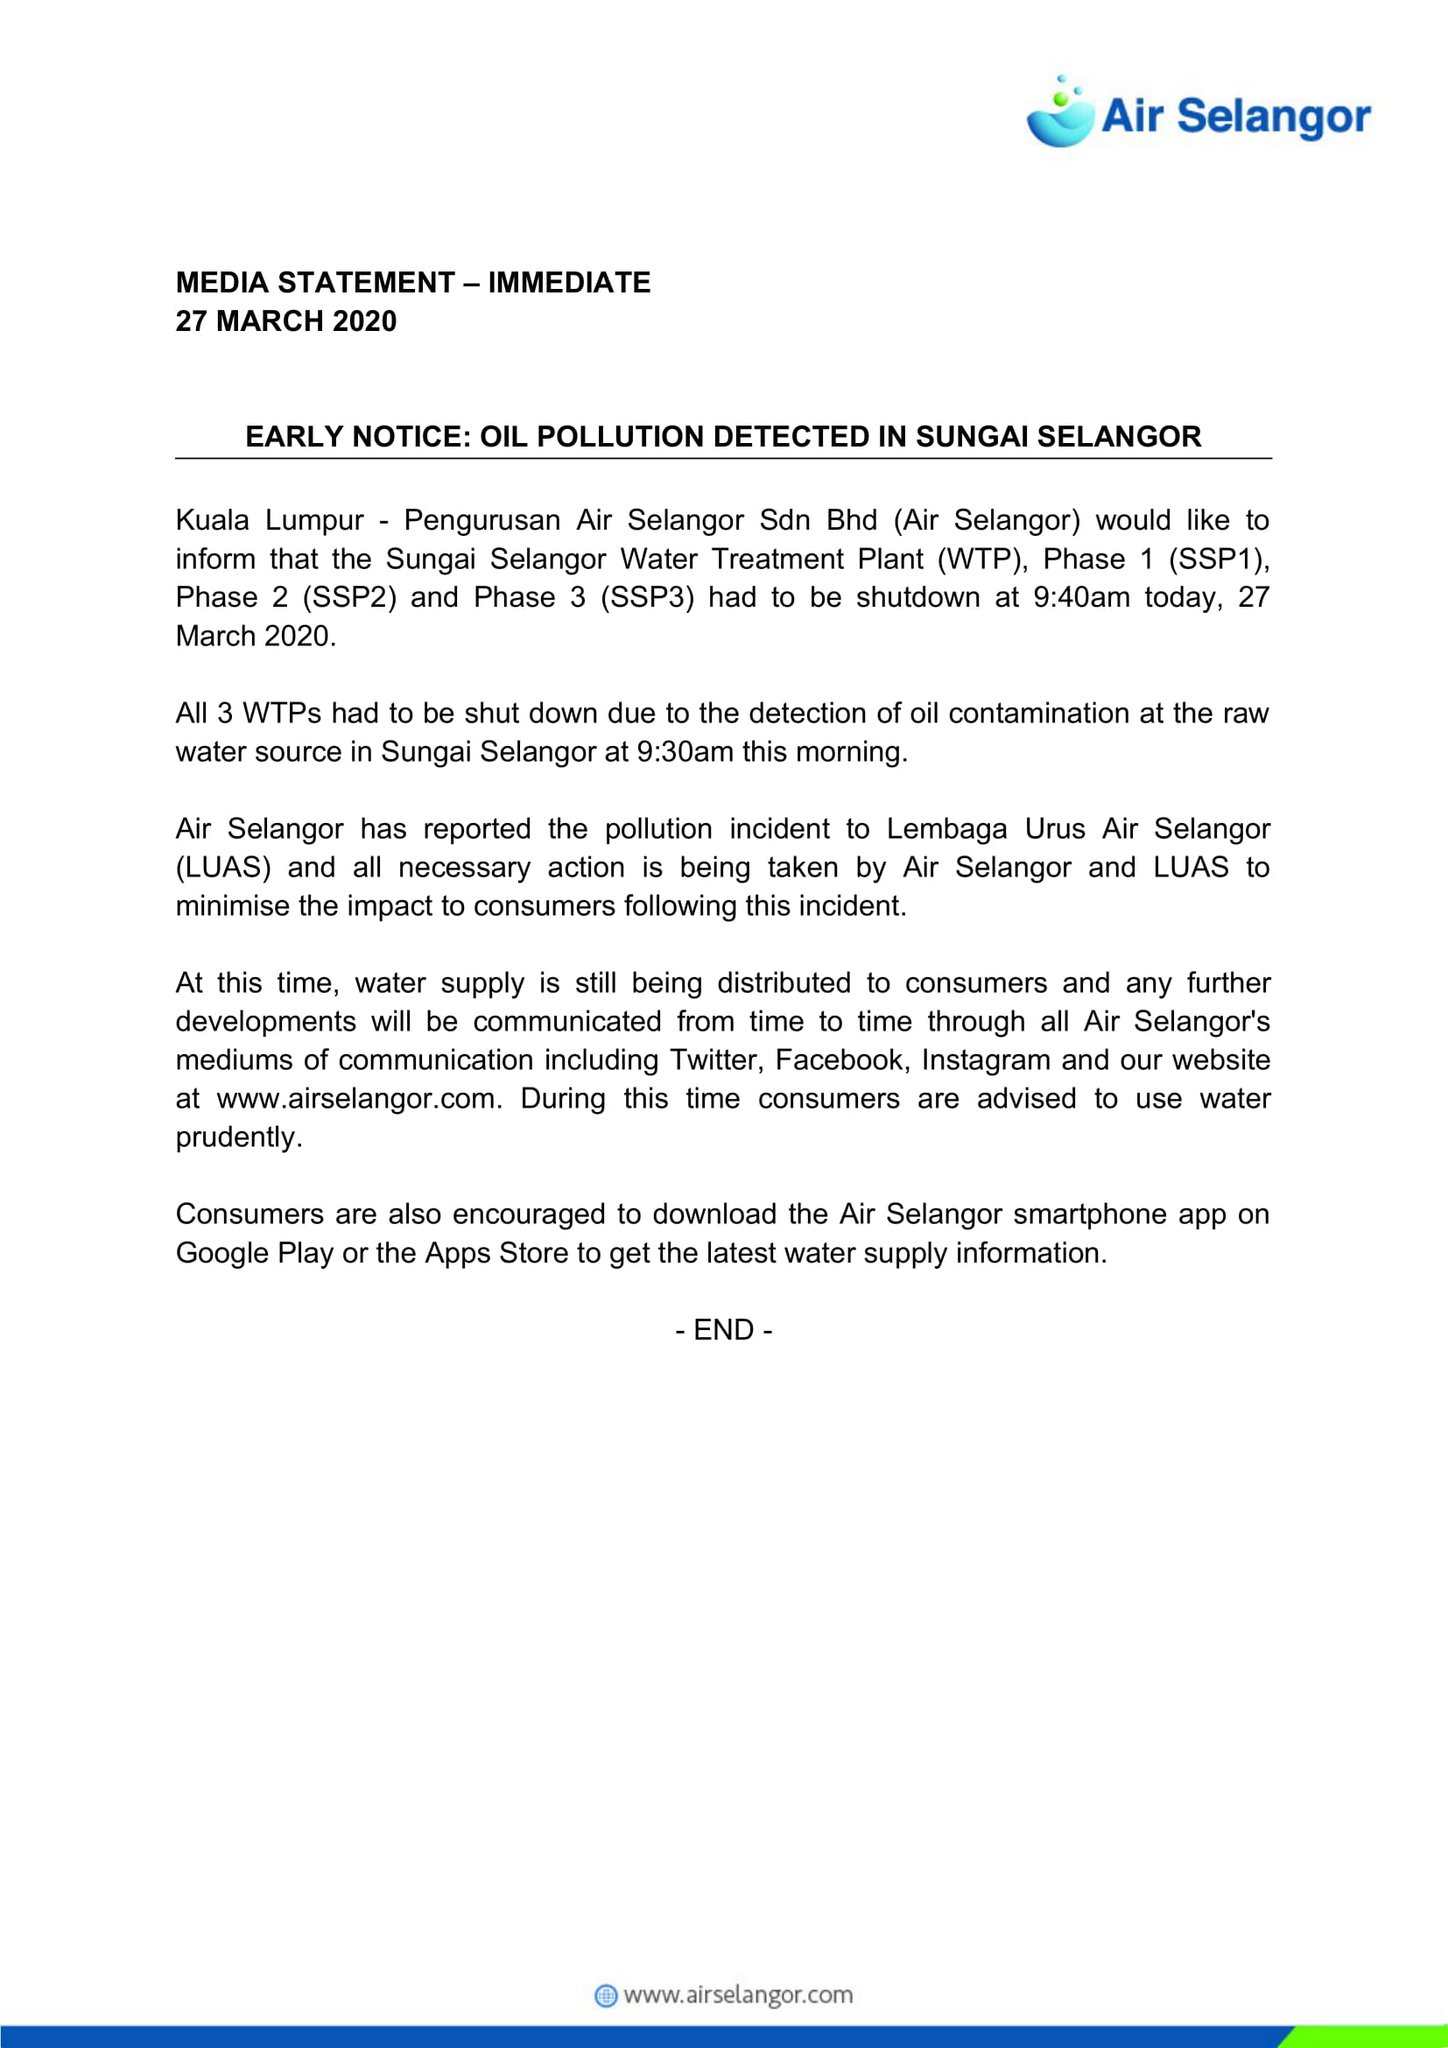 Air Selangor On Twitter Early Notice Oil Pollution Detected In Sungai Selangor